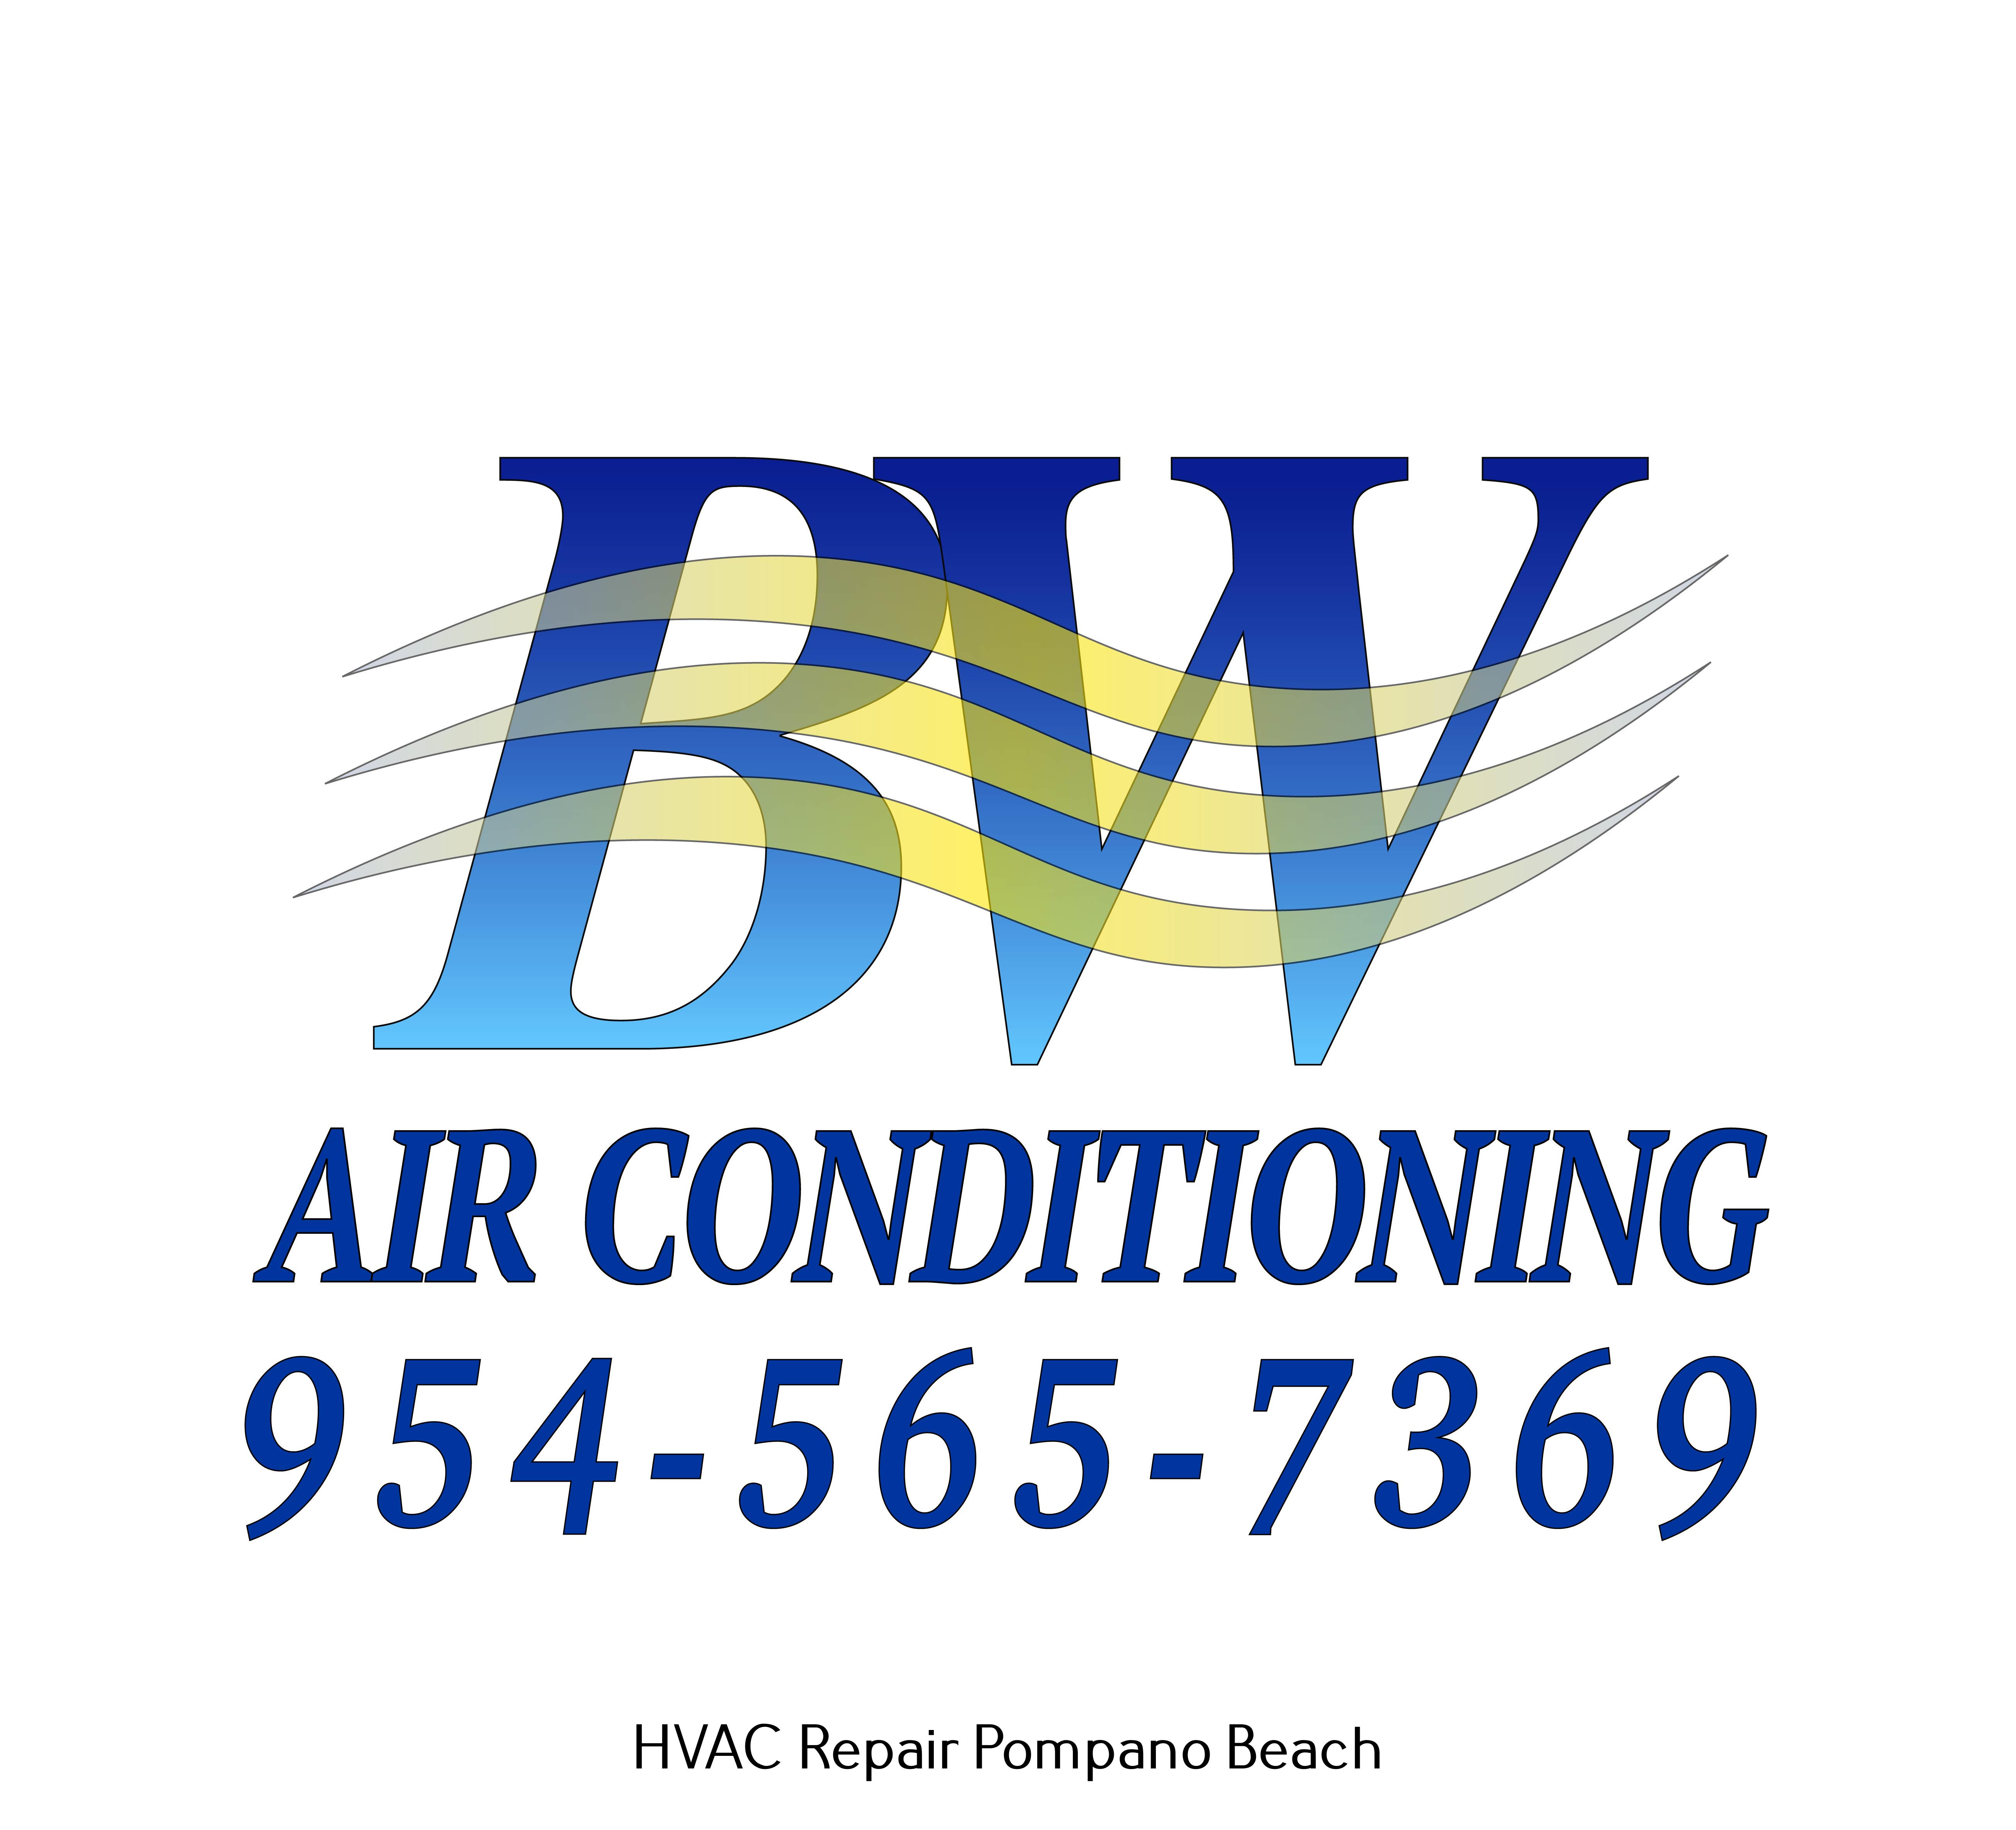 Expert Air Conditioning Services That Gives Clients Reliable HVAC Systems